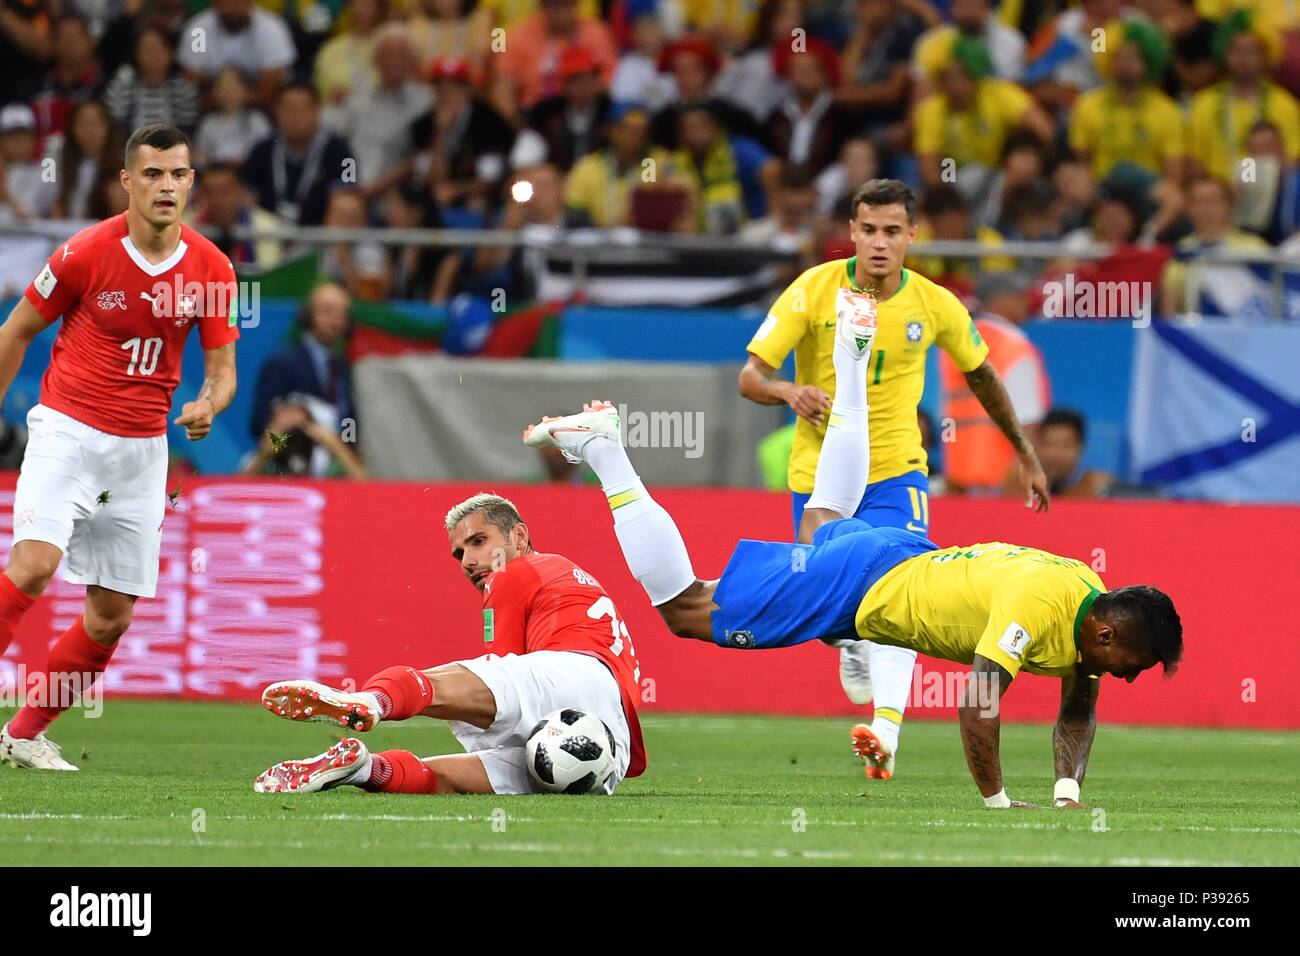 Rostov On Don, Russland. 17th June, 2018. Valon BEHRAMI (SUI), action, duels, foul on PAULINHO (BRA). Brazil (BRA) -Switzerland (SUI) 1-1, Preliminary Round, Group E, match 09, on 17.06.2018 in Rostov-on-Don, Rostov Arena. Football World Cup 2018 in Russia from 14.06. - 15.07.2018. | usage worldwide Credit: dpa/Alamy Live News Stock Photo